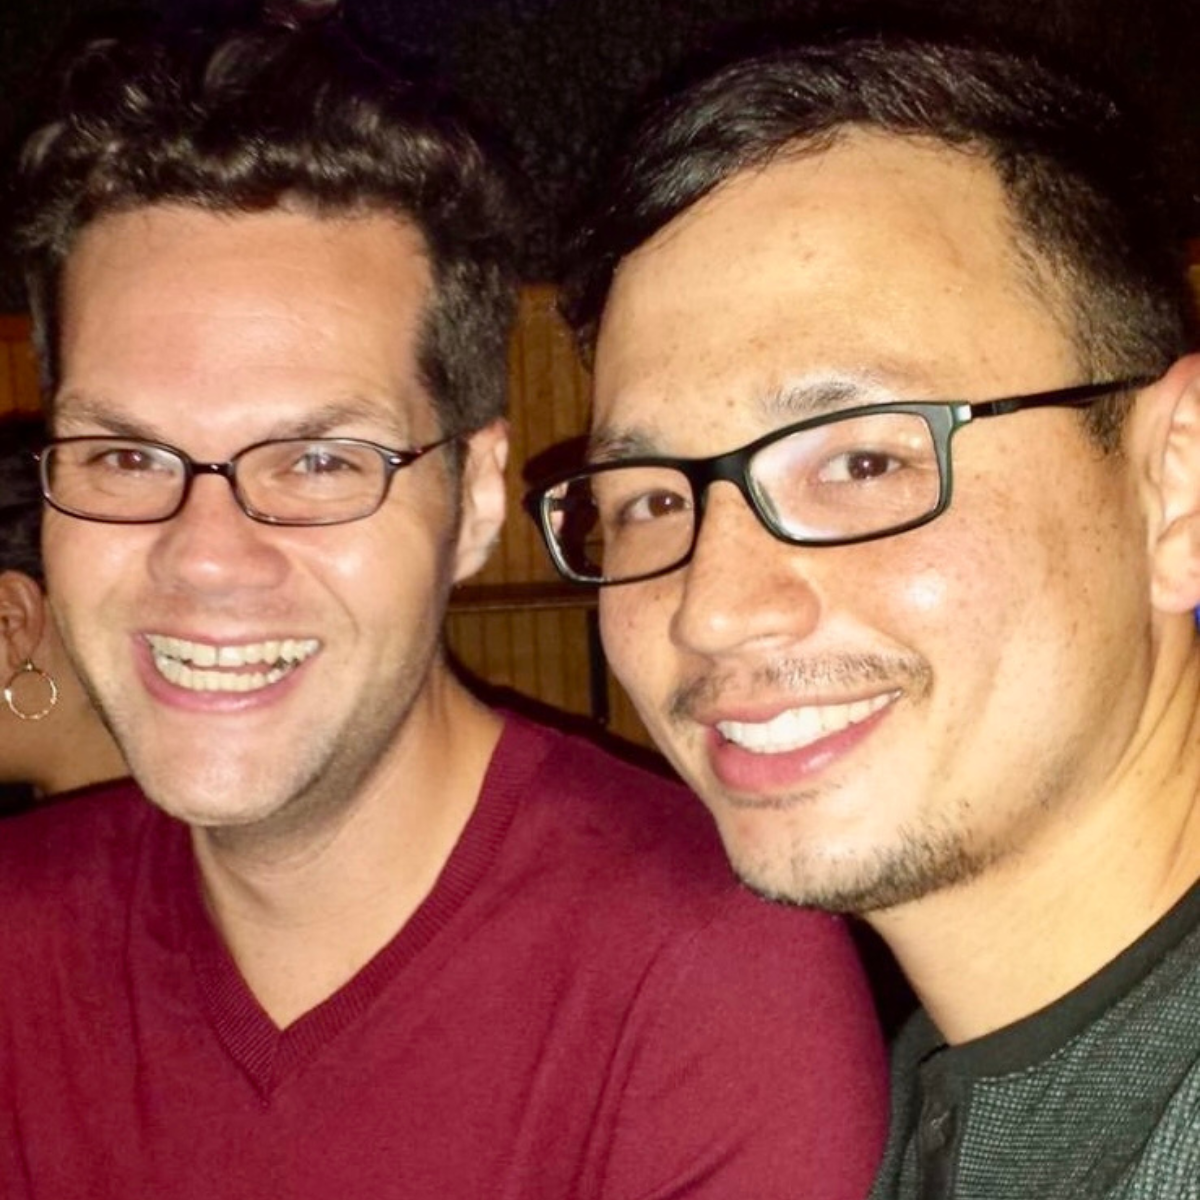 gay dads , both with brown hair and glasses, looking to adopt in houston